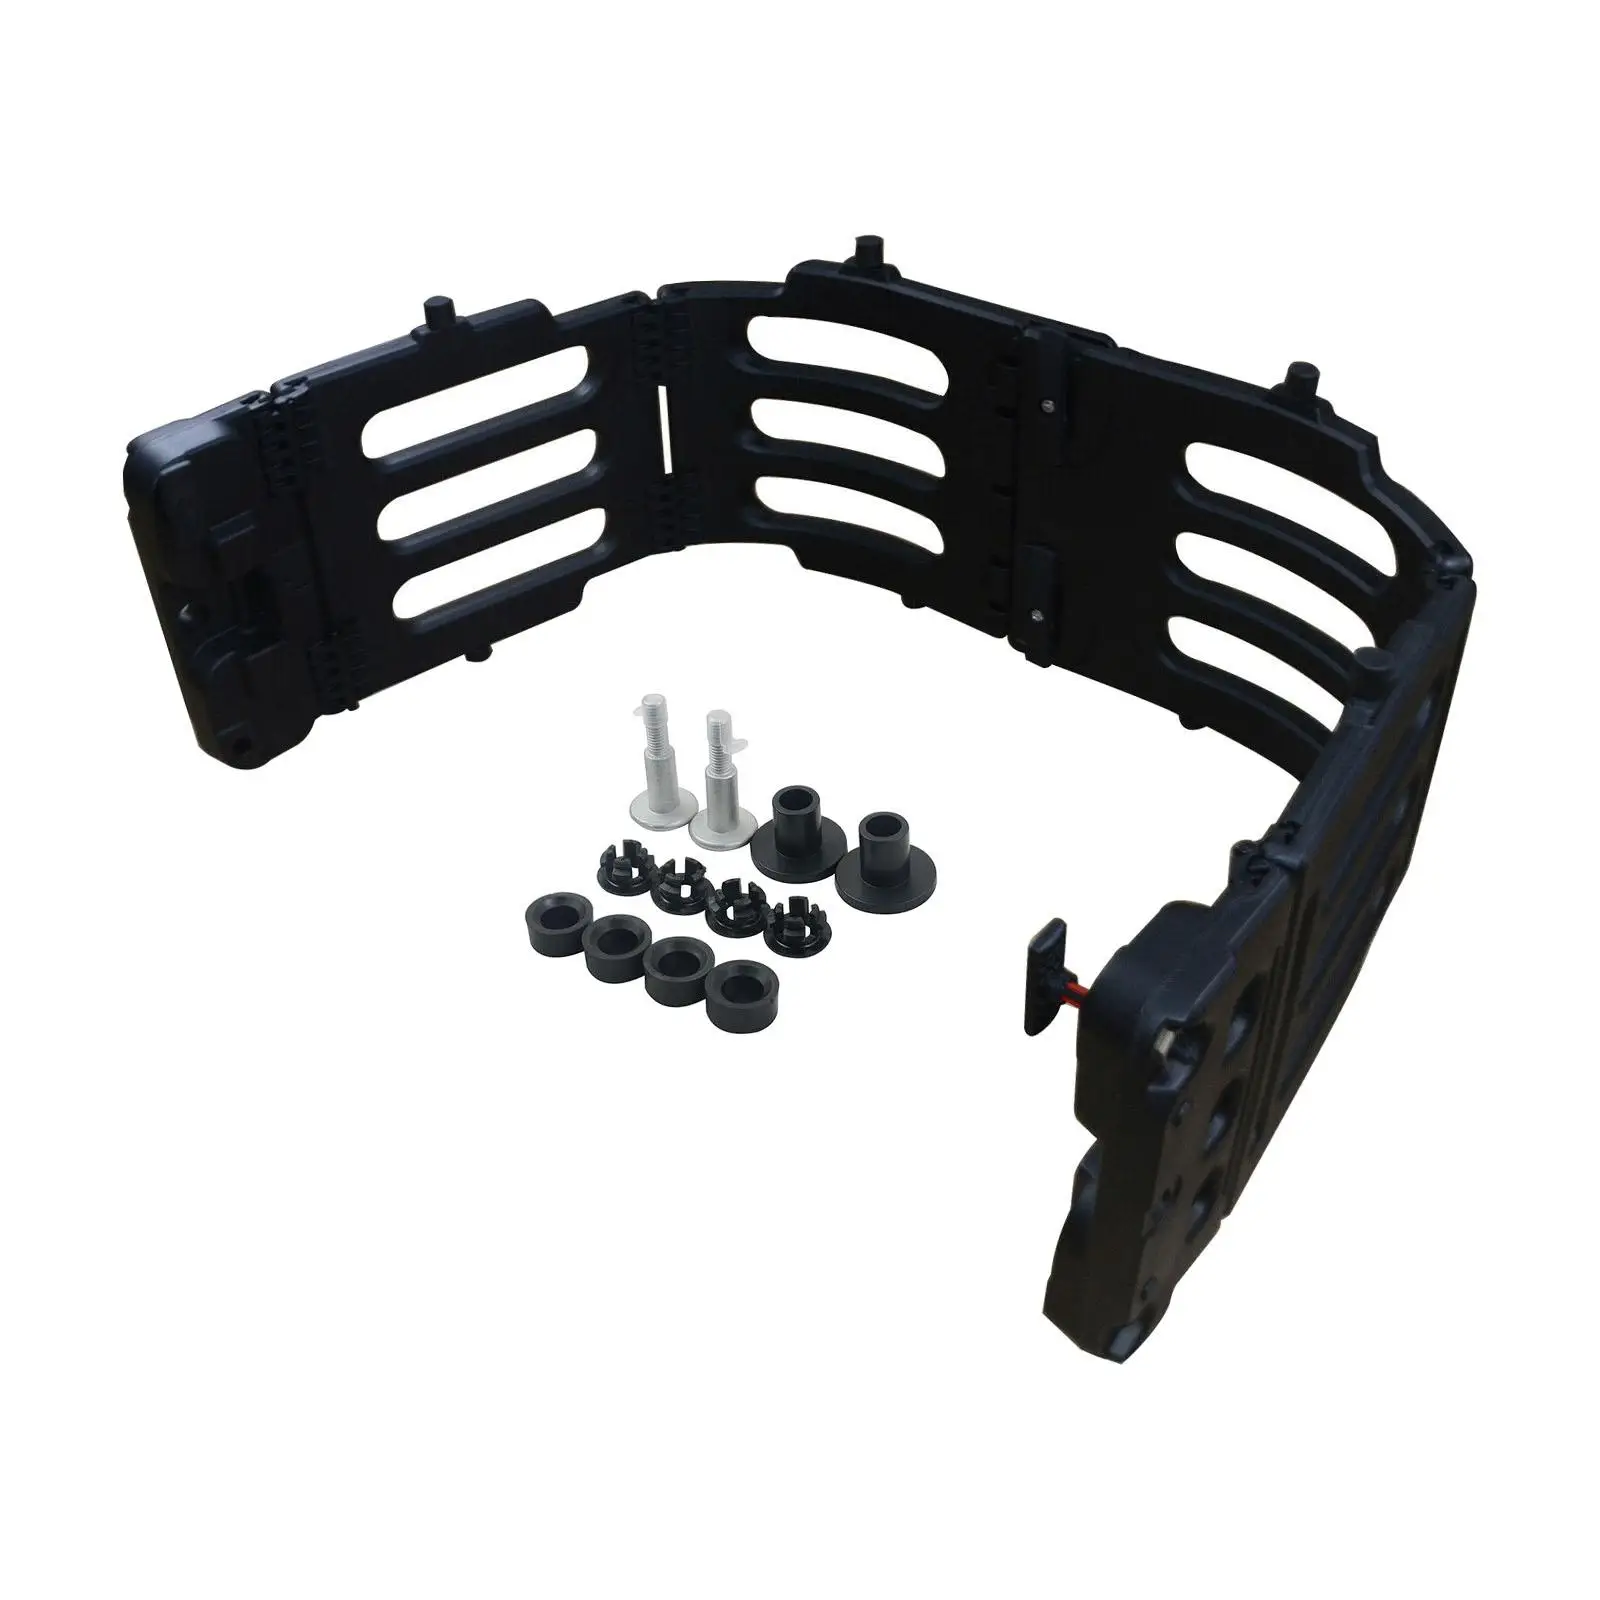 Stowable Truck Bed Extender Kit fl3Z-99286A40-C for Ford F150 2015-2021 Spare Parts